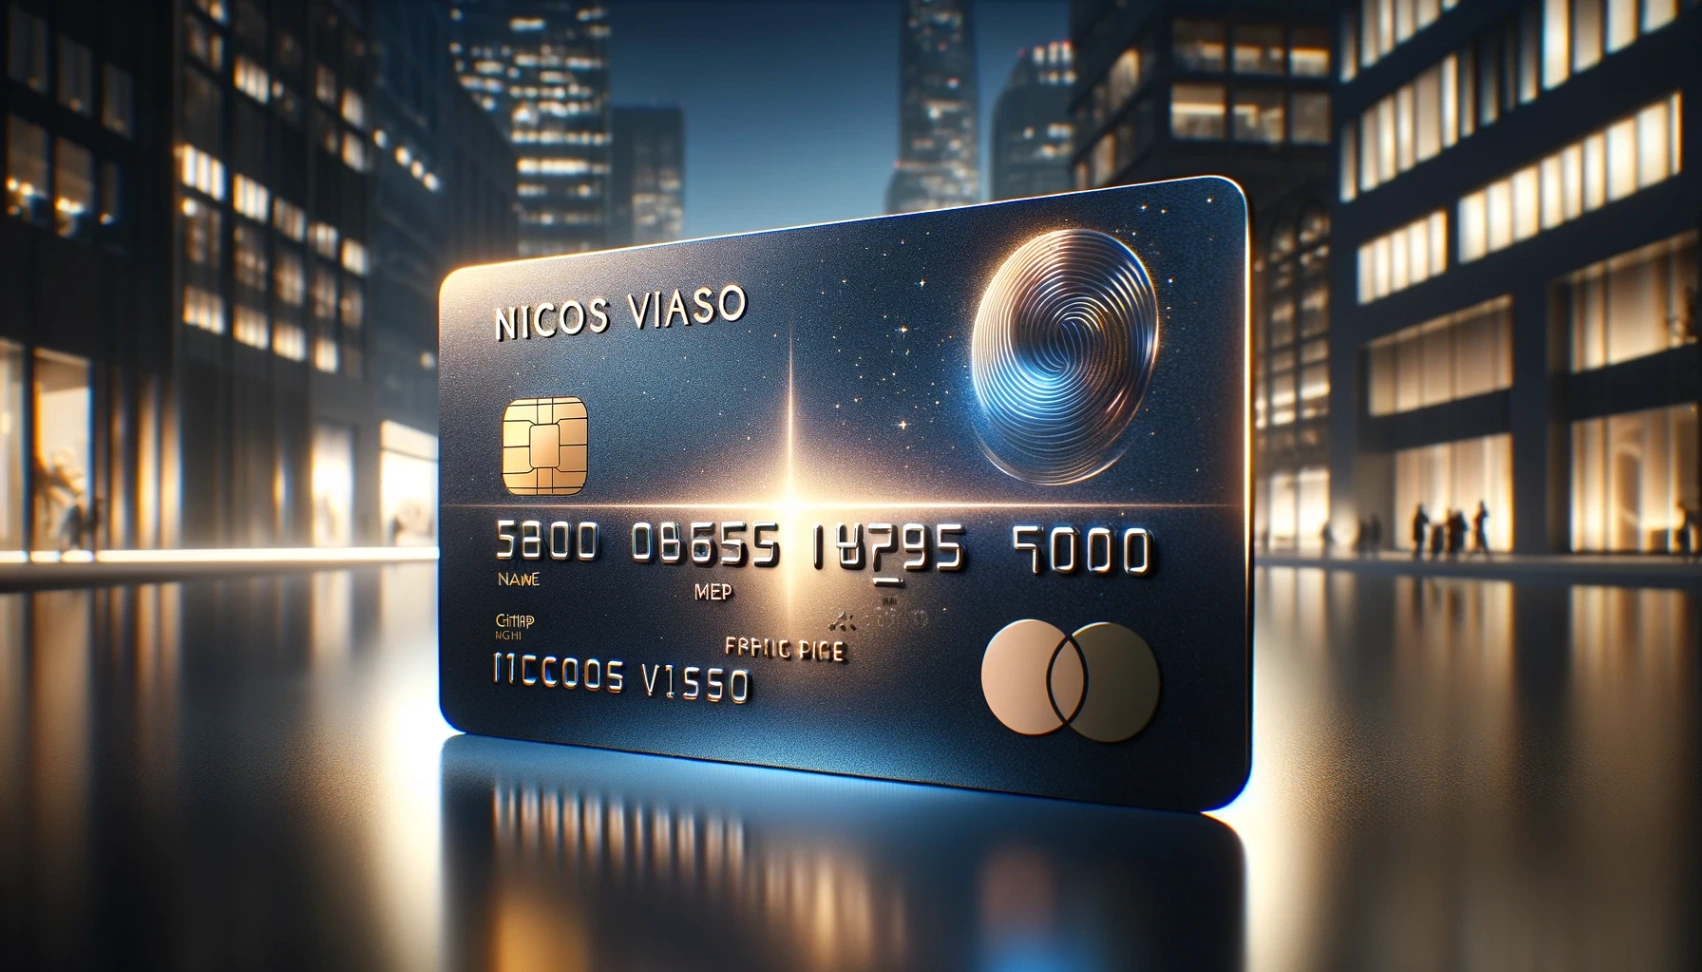 Learn How to Order Nicos Viaso Credit Card